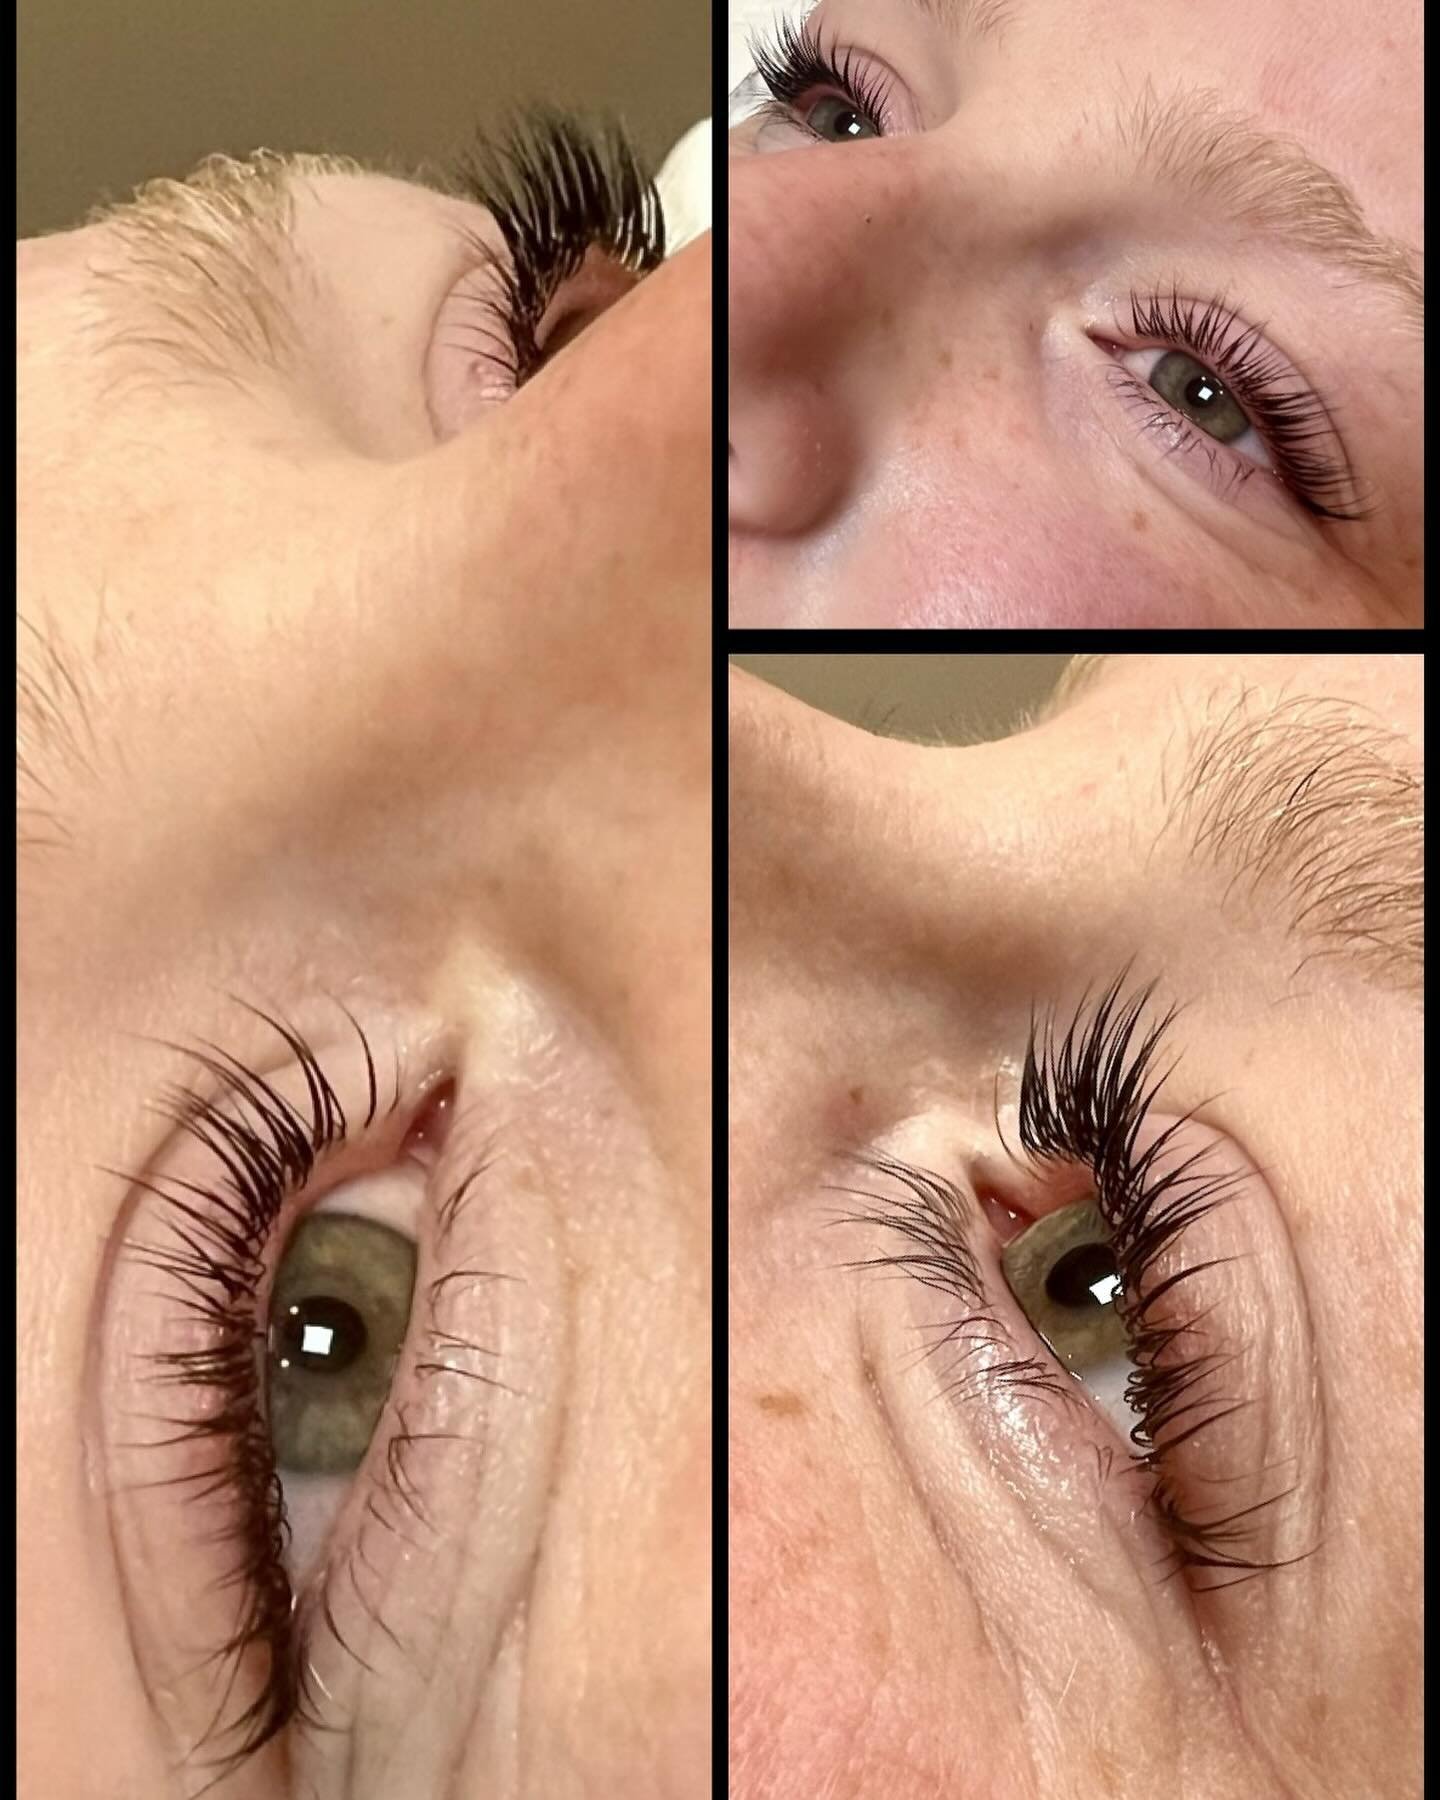 Make your eyes pop .. By just lifting &amp; tinting lashes, create longer, fuller thicker lashes. Perfect for holidays 🌴☀️or just a special occasion 🩷 #lashlift #lashliftandtint #eyelashlift #eyelashliftandtint #eyeluvlashes